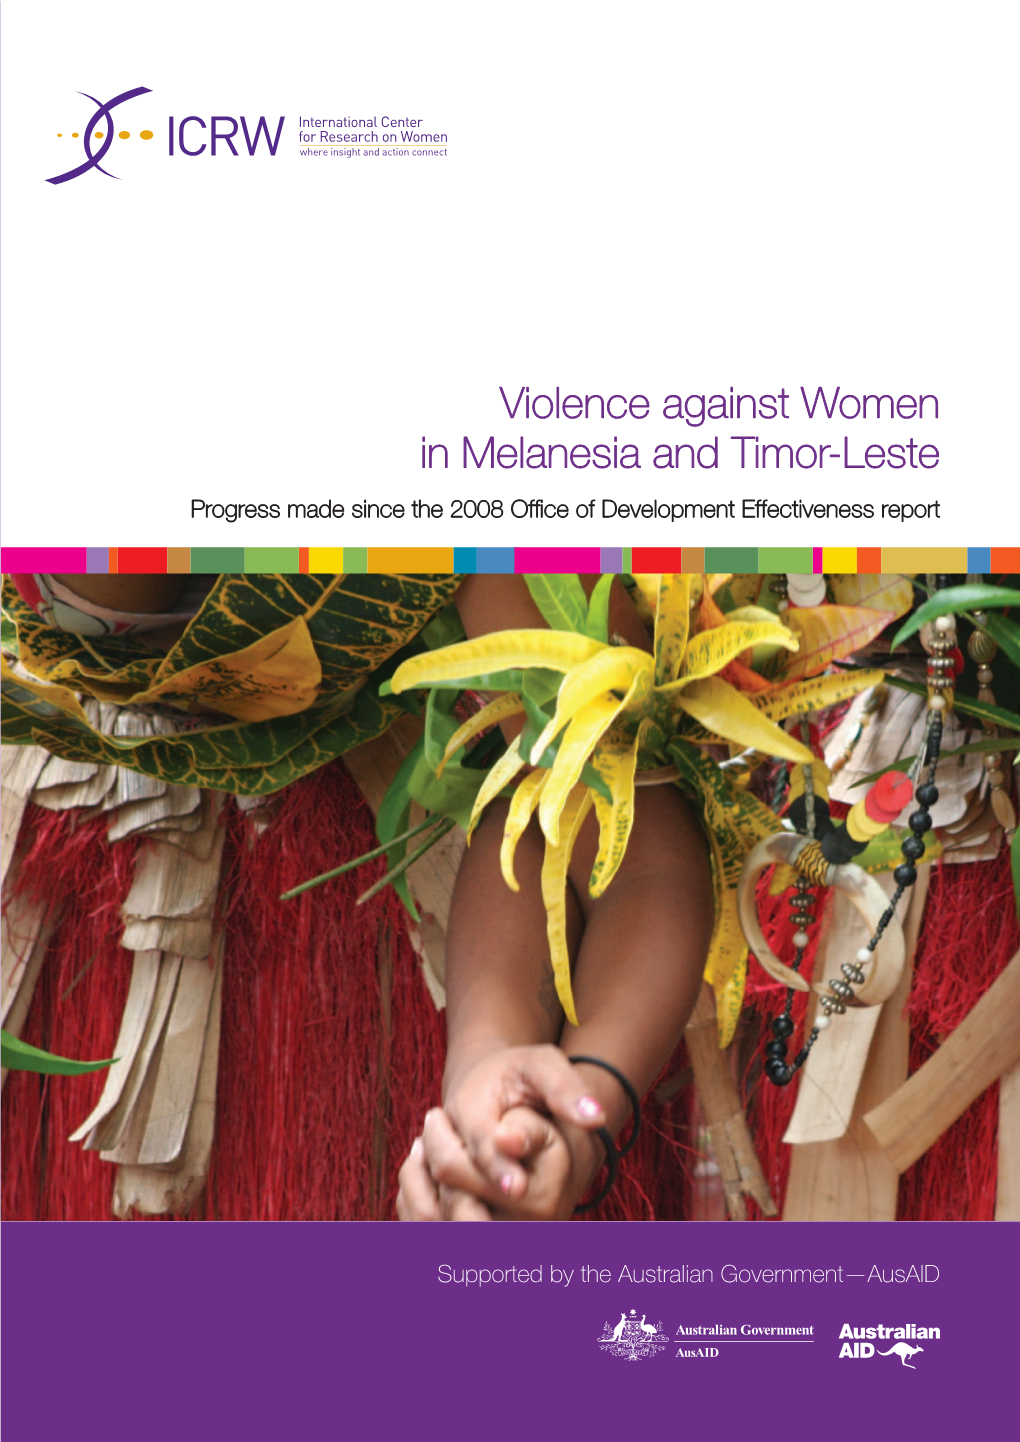 Violence Against Women in Melanesia and Timor-Leste Progress Made Since the 2008 Office of Development Effectiveness Report